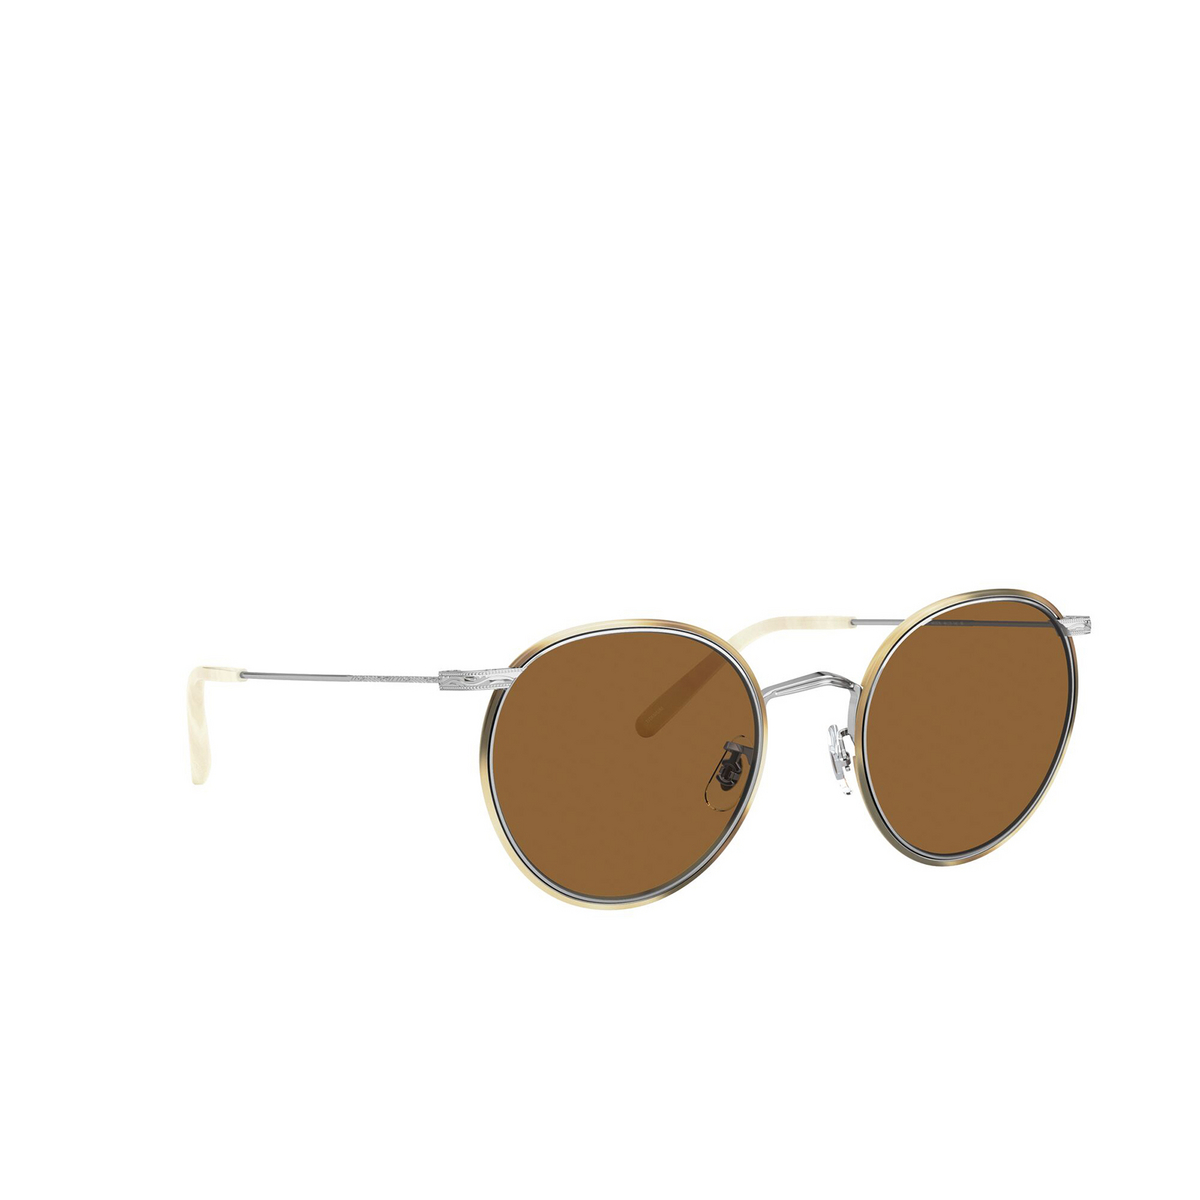 Oliver Peoples® Round Sunglasses: Casson OV1269ST color Silver / Beige Horn 503653 - three-quarters view.